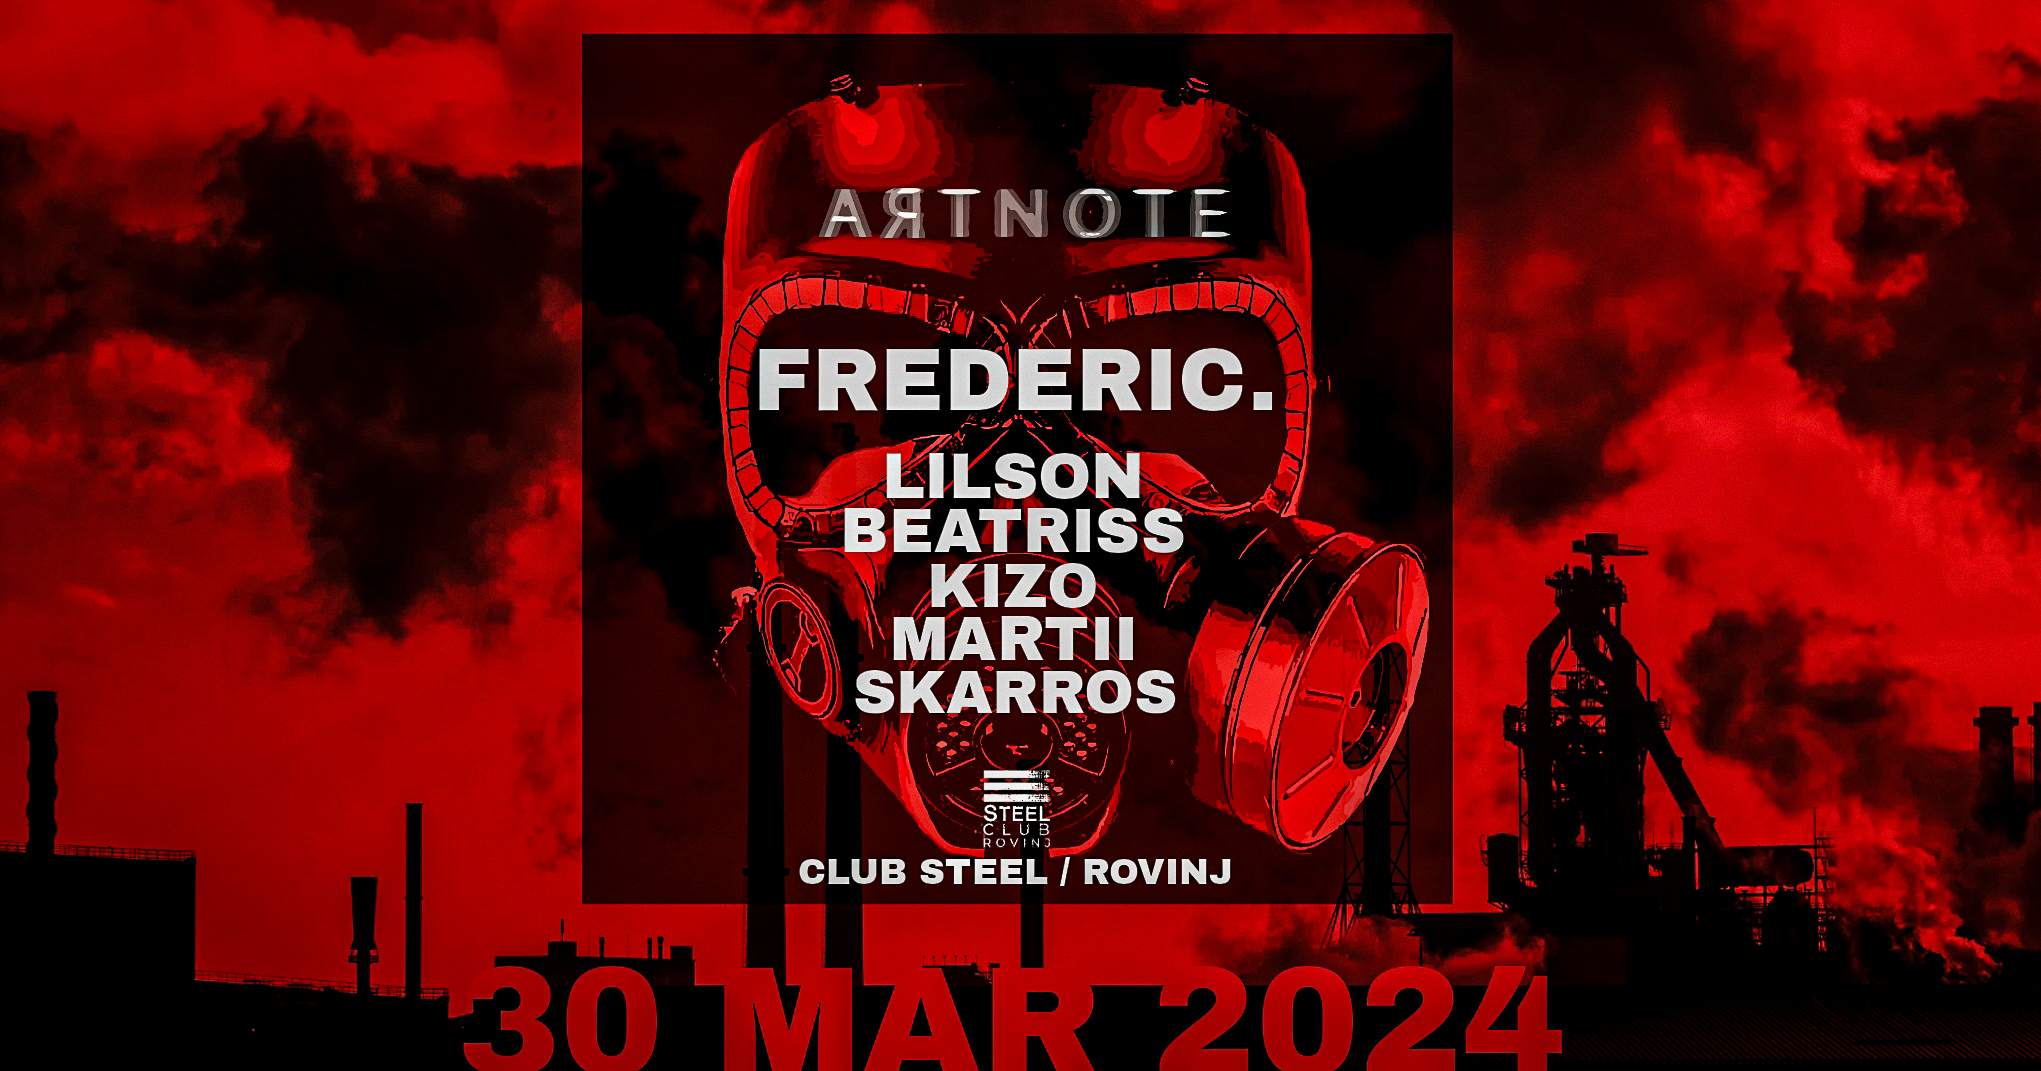 ARTNOTE x EASTER with FREDERIC x TechnoSteel - Página frontal